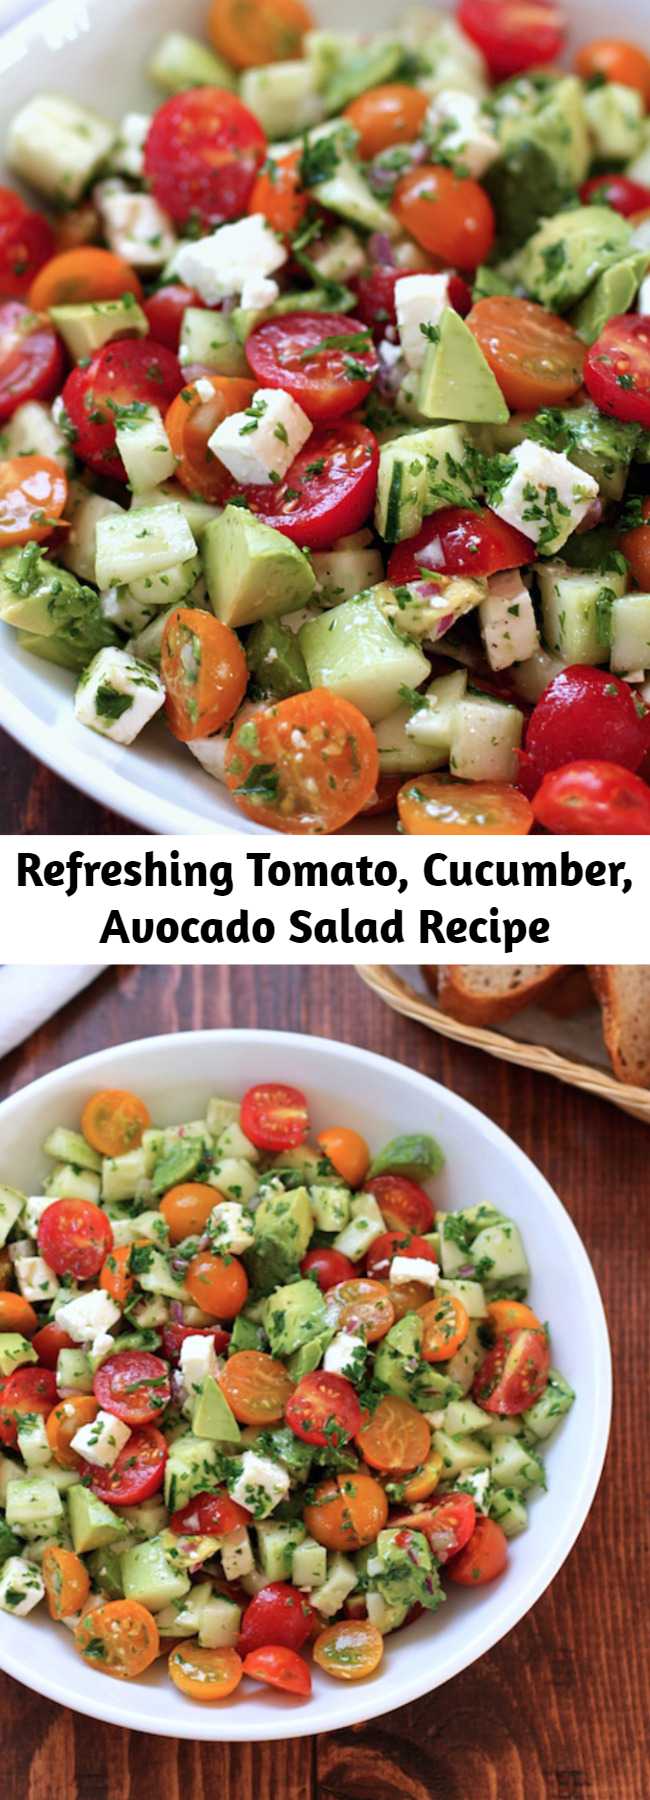 Refreshing Tomato, Cucumber, Avocado Salad Recipe - This tomato, cucumber, avocado salad is an easy, flavorful summer salad.  It’s crunchy, fresh and simple to make.  It’s a family favorite and ready in less than 15 minutes.